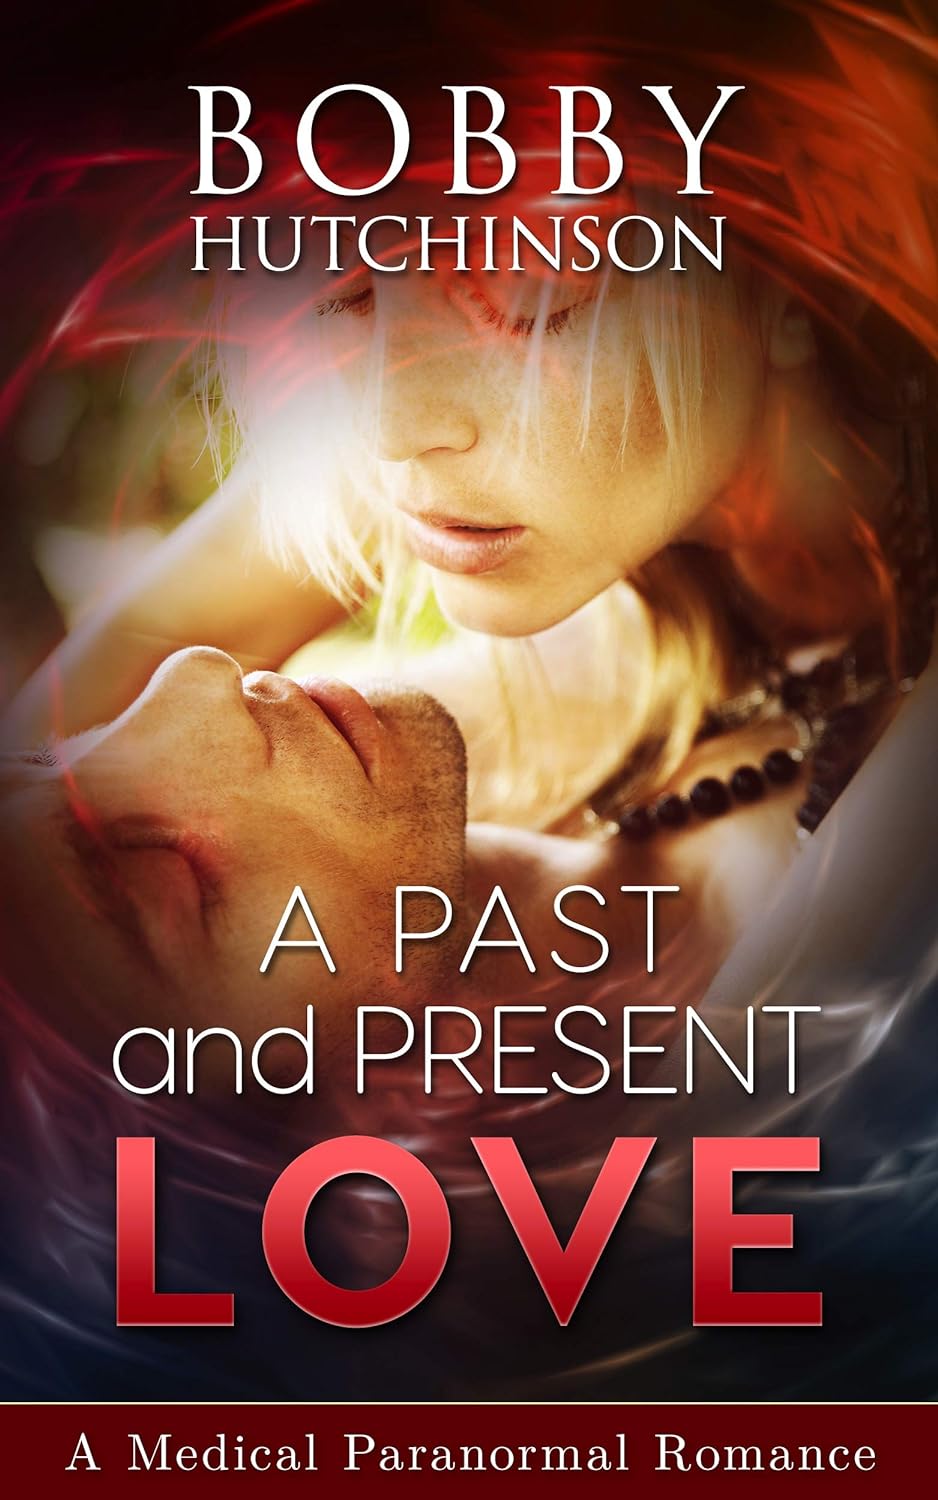 A Past and Present Love by Bobby Hutchinson